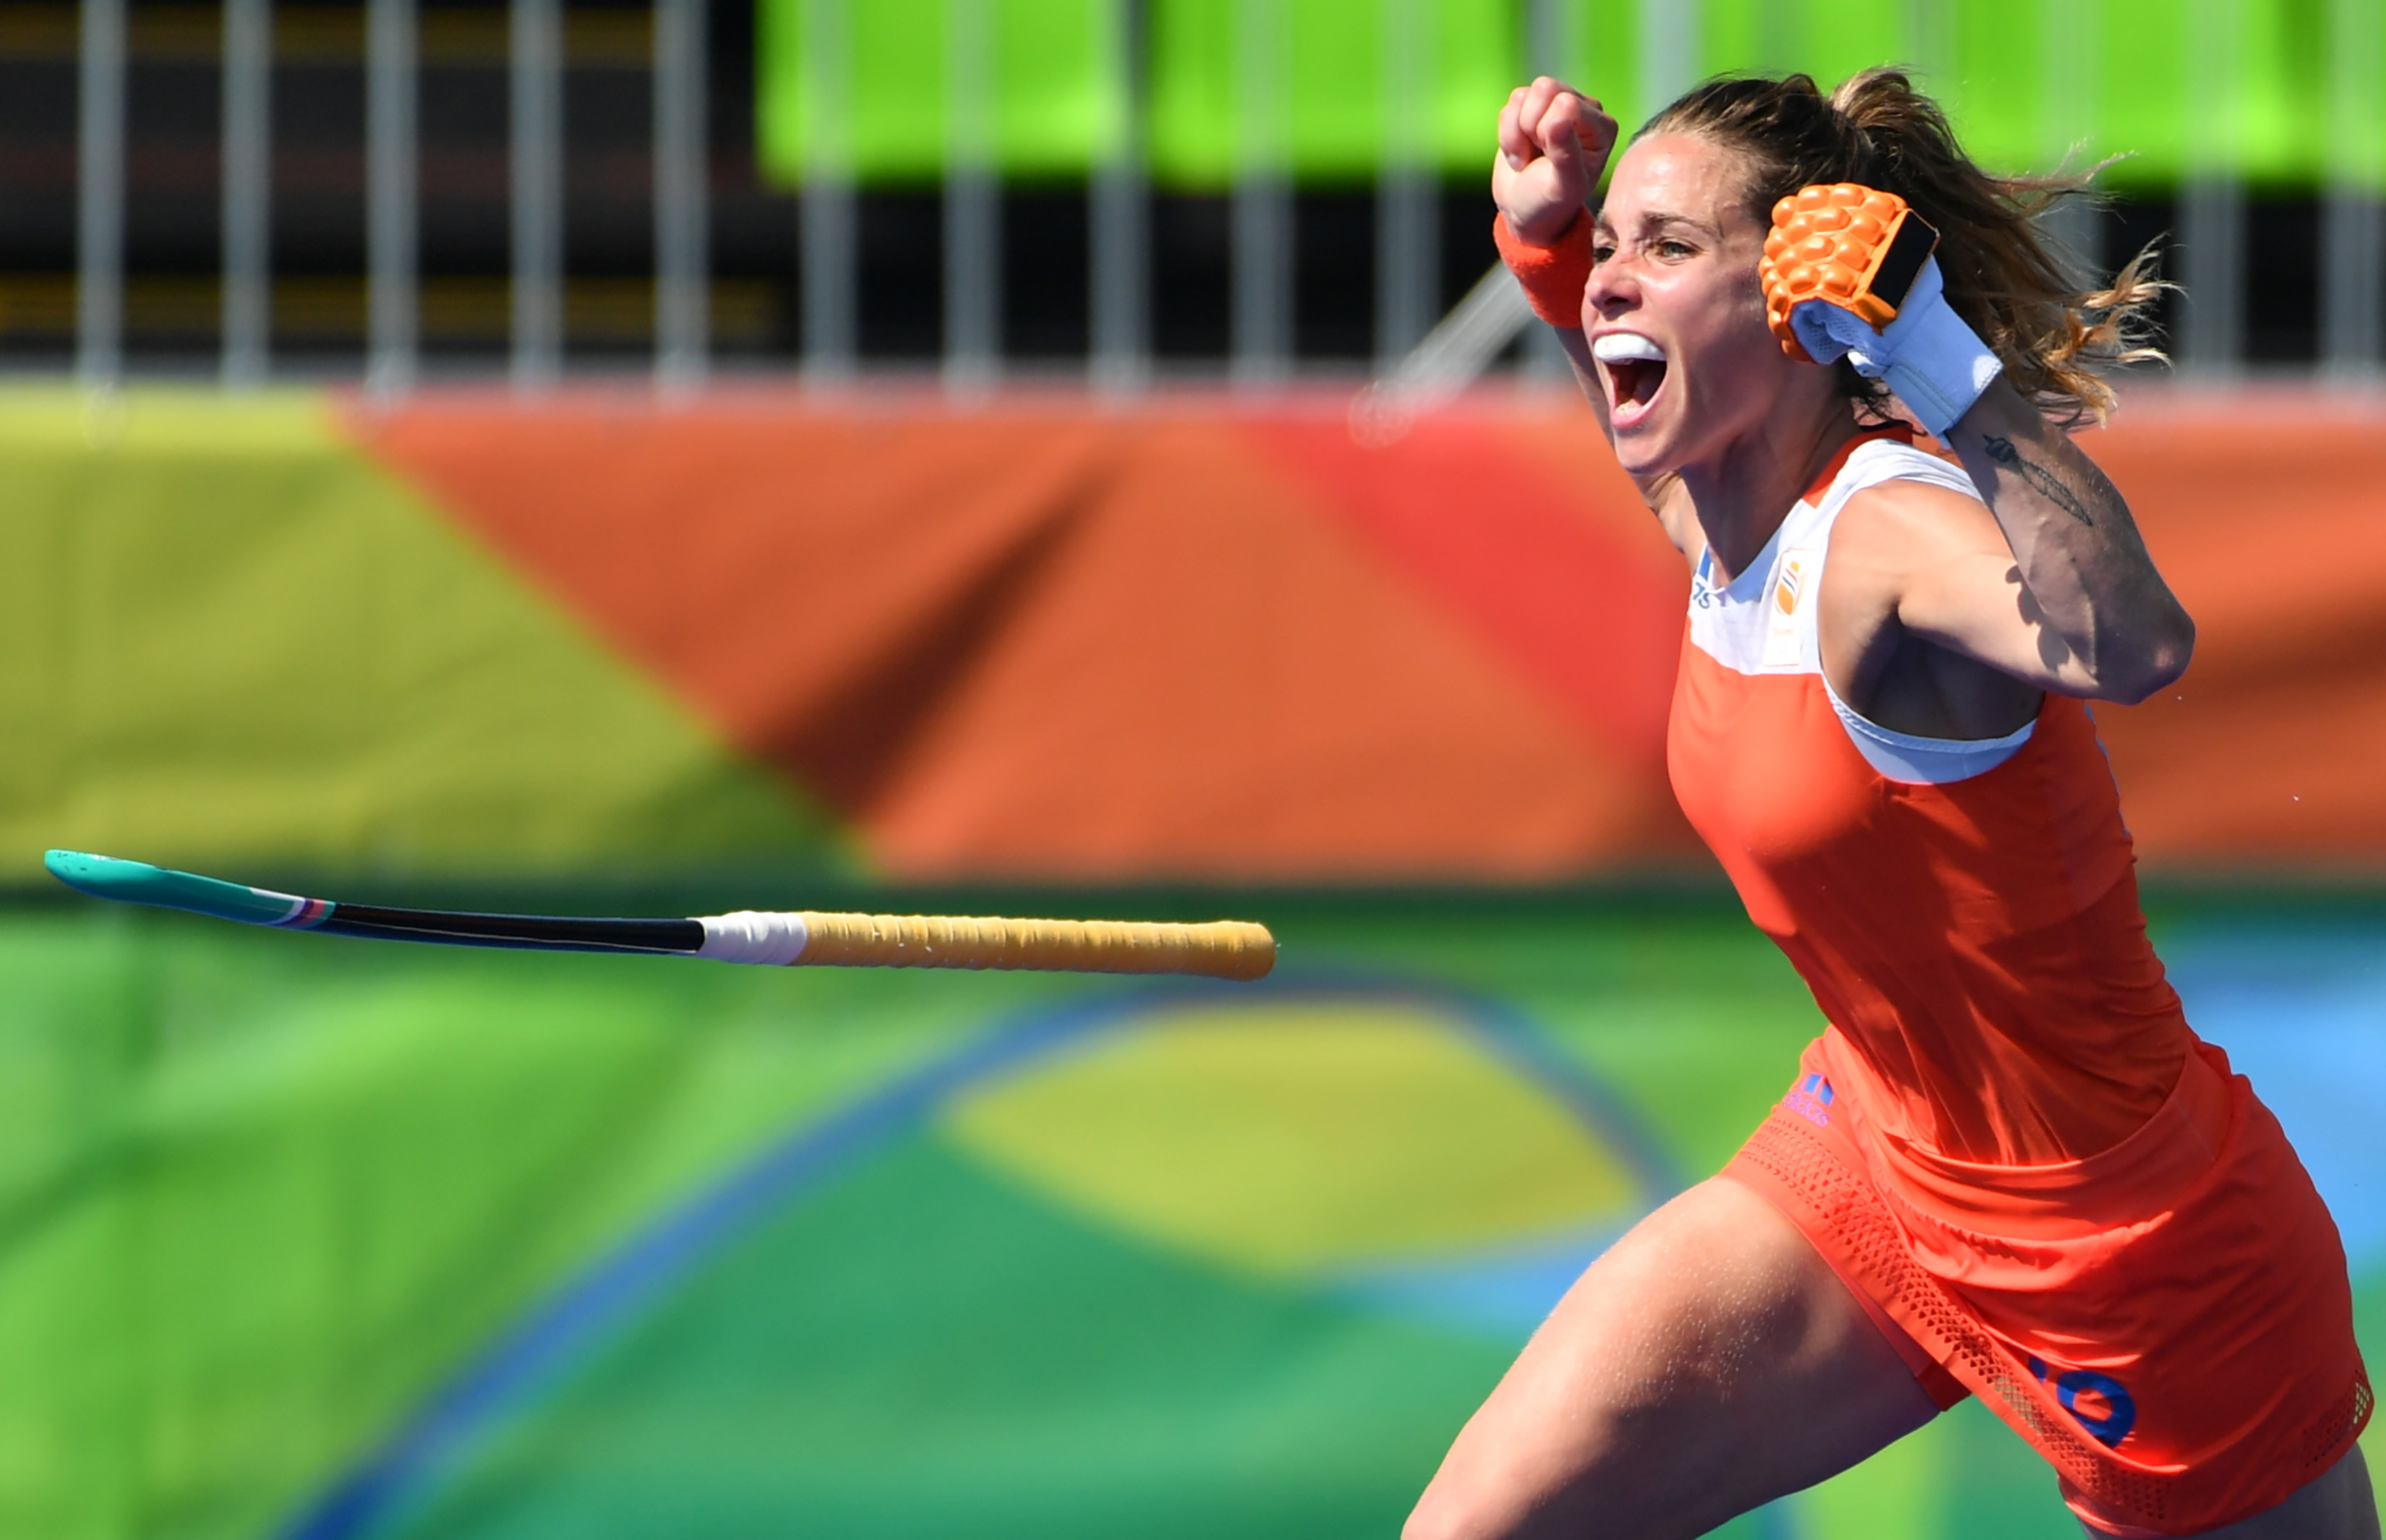 TOPSHOT - Netherlands' Ellen Hoog celebrates her goal during the penalty shoot-out at the end of the the women's semifinal field hockey Netherlands vs Germany match of the Rio 2016 Olympics Games at the Olympic Hockey Centre in Rio de Janeiro on August 17, 2016. / AFP / Pascal GUYOT (Photo credit should read PASCAL GUYOT/AFP/Getty Images)